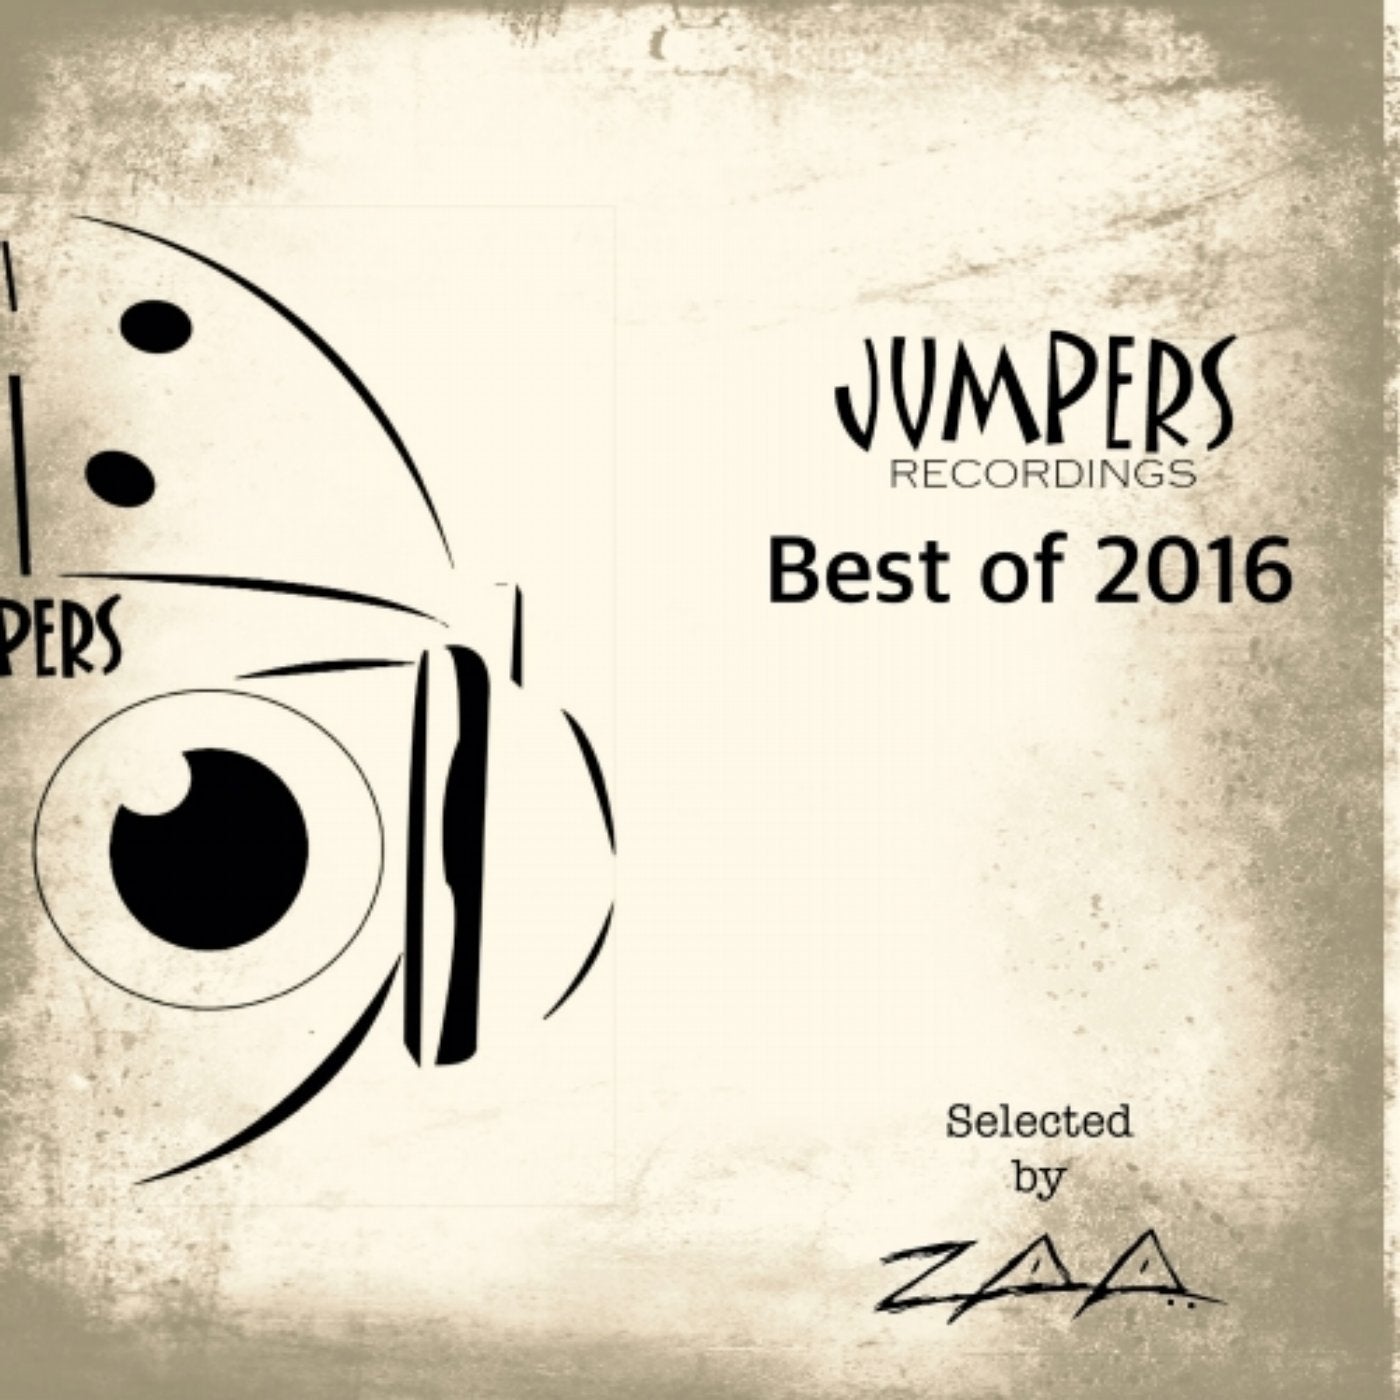 Jumpers Best of 2016